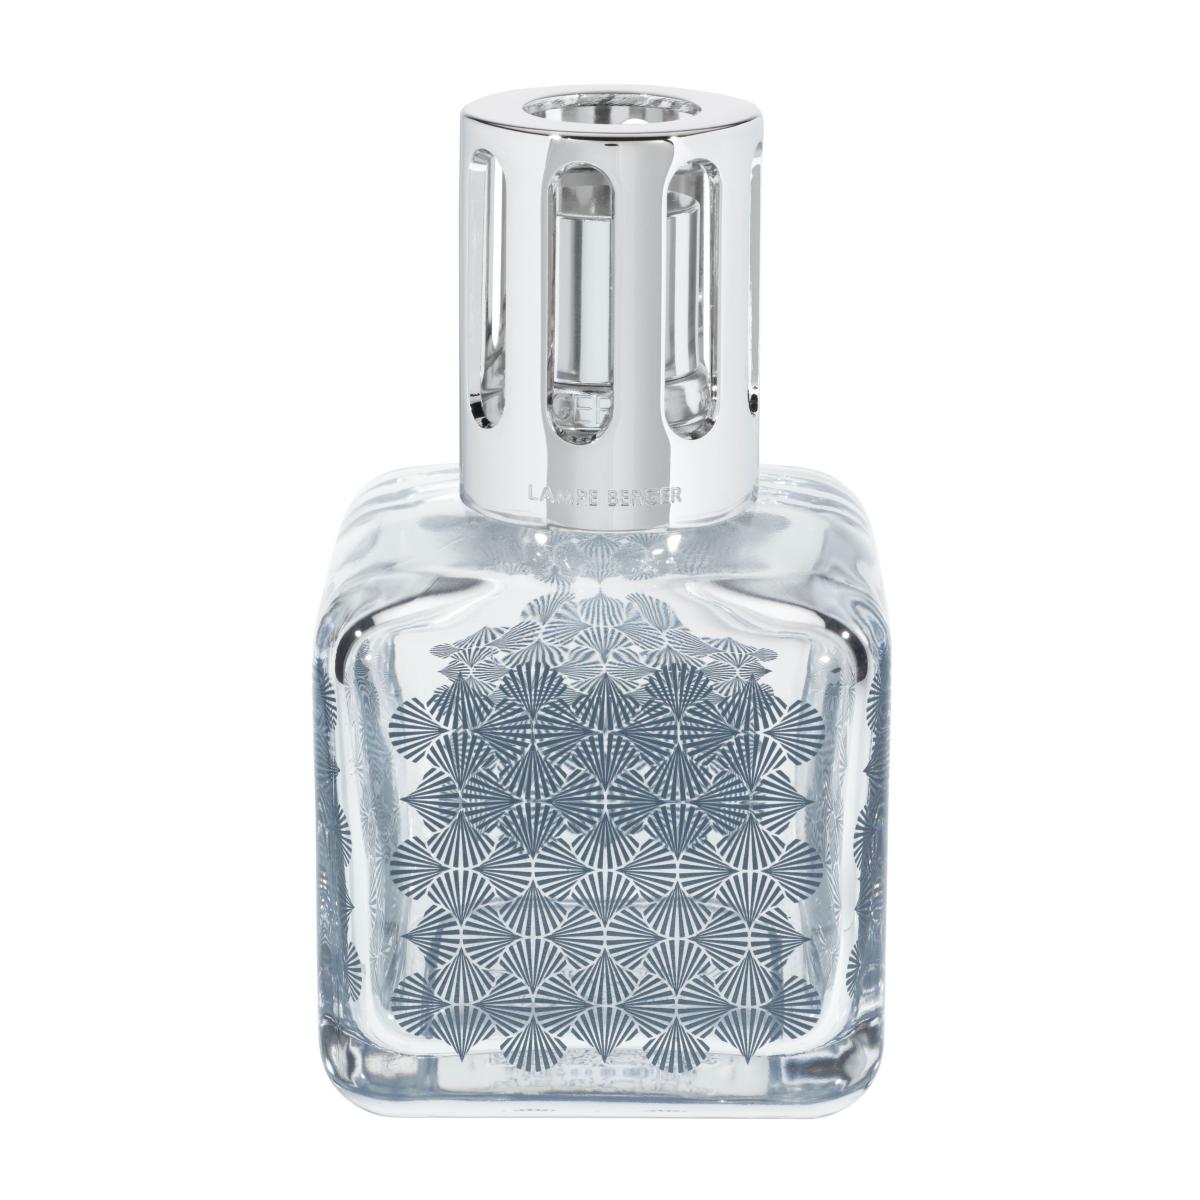 Ginkgo Ice Cube Lampe Berger Delicate White Musk Gift Set